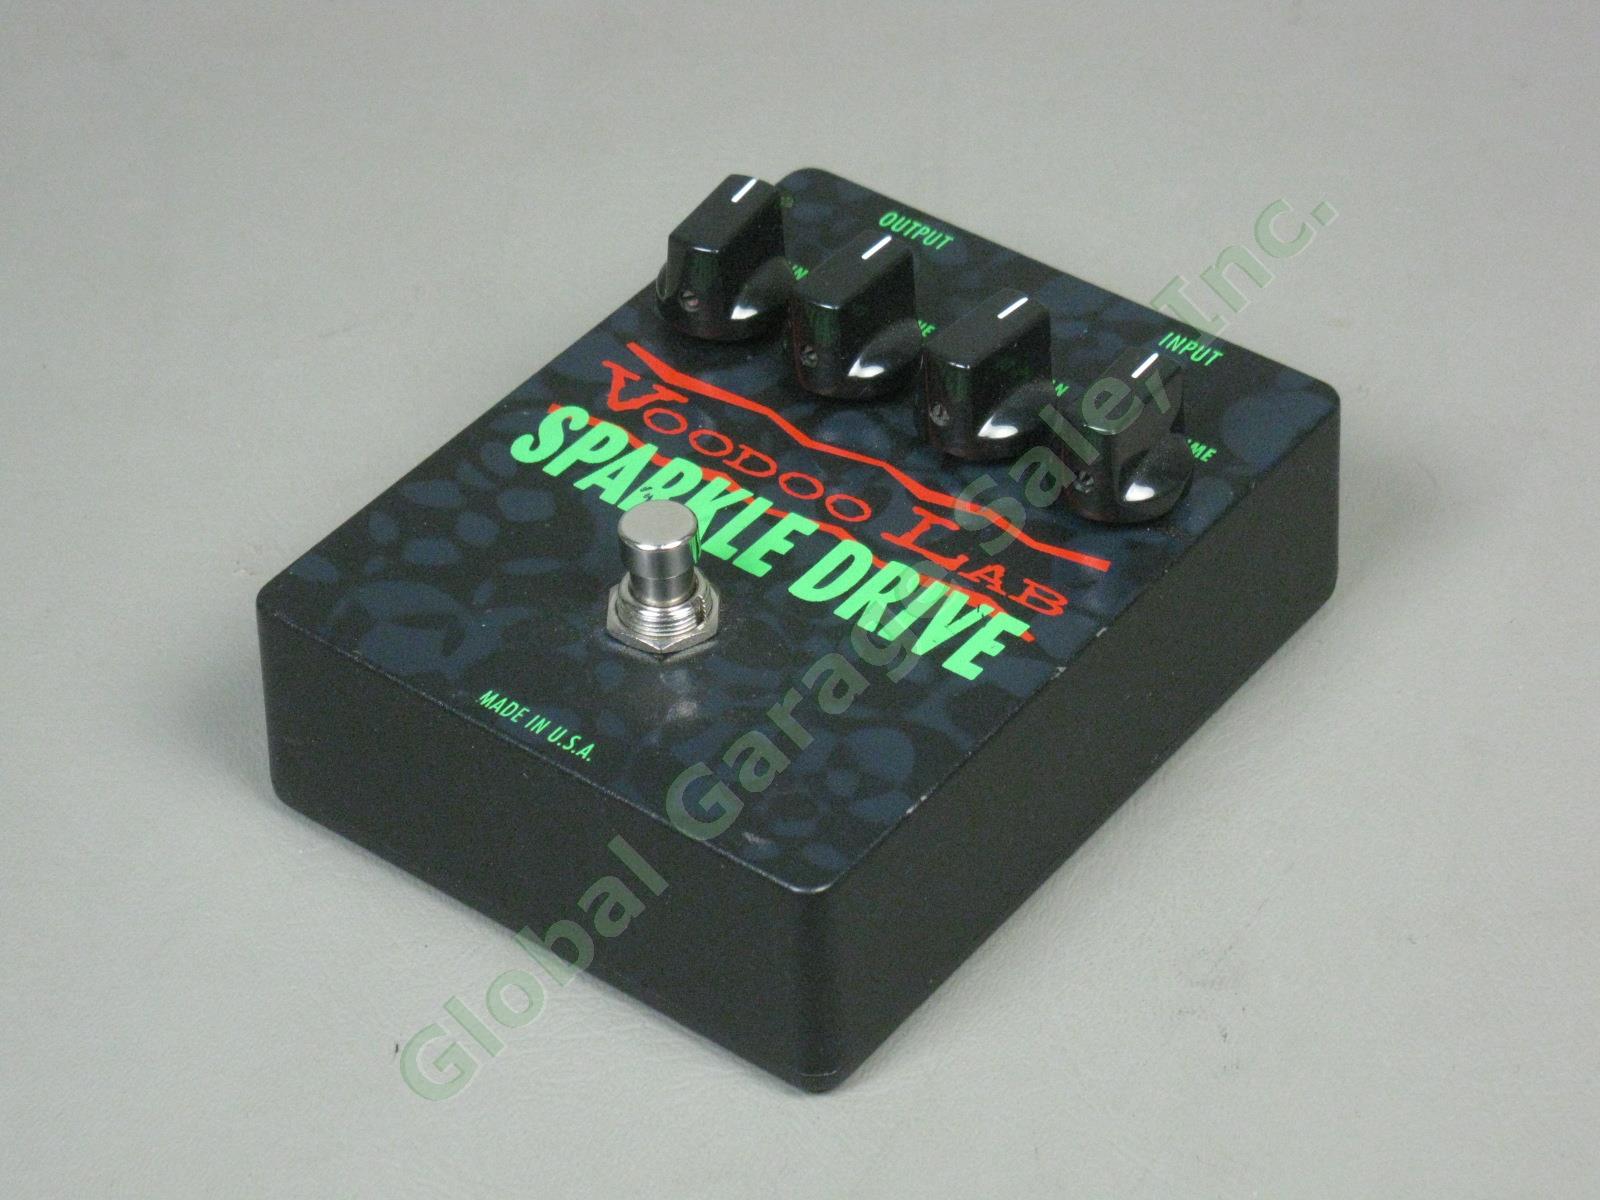 Voodoo Lab Sparkle Drive Overdrive Distortion Guitar Effects Pedal 1 Owner EXC!! 1